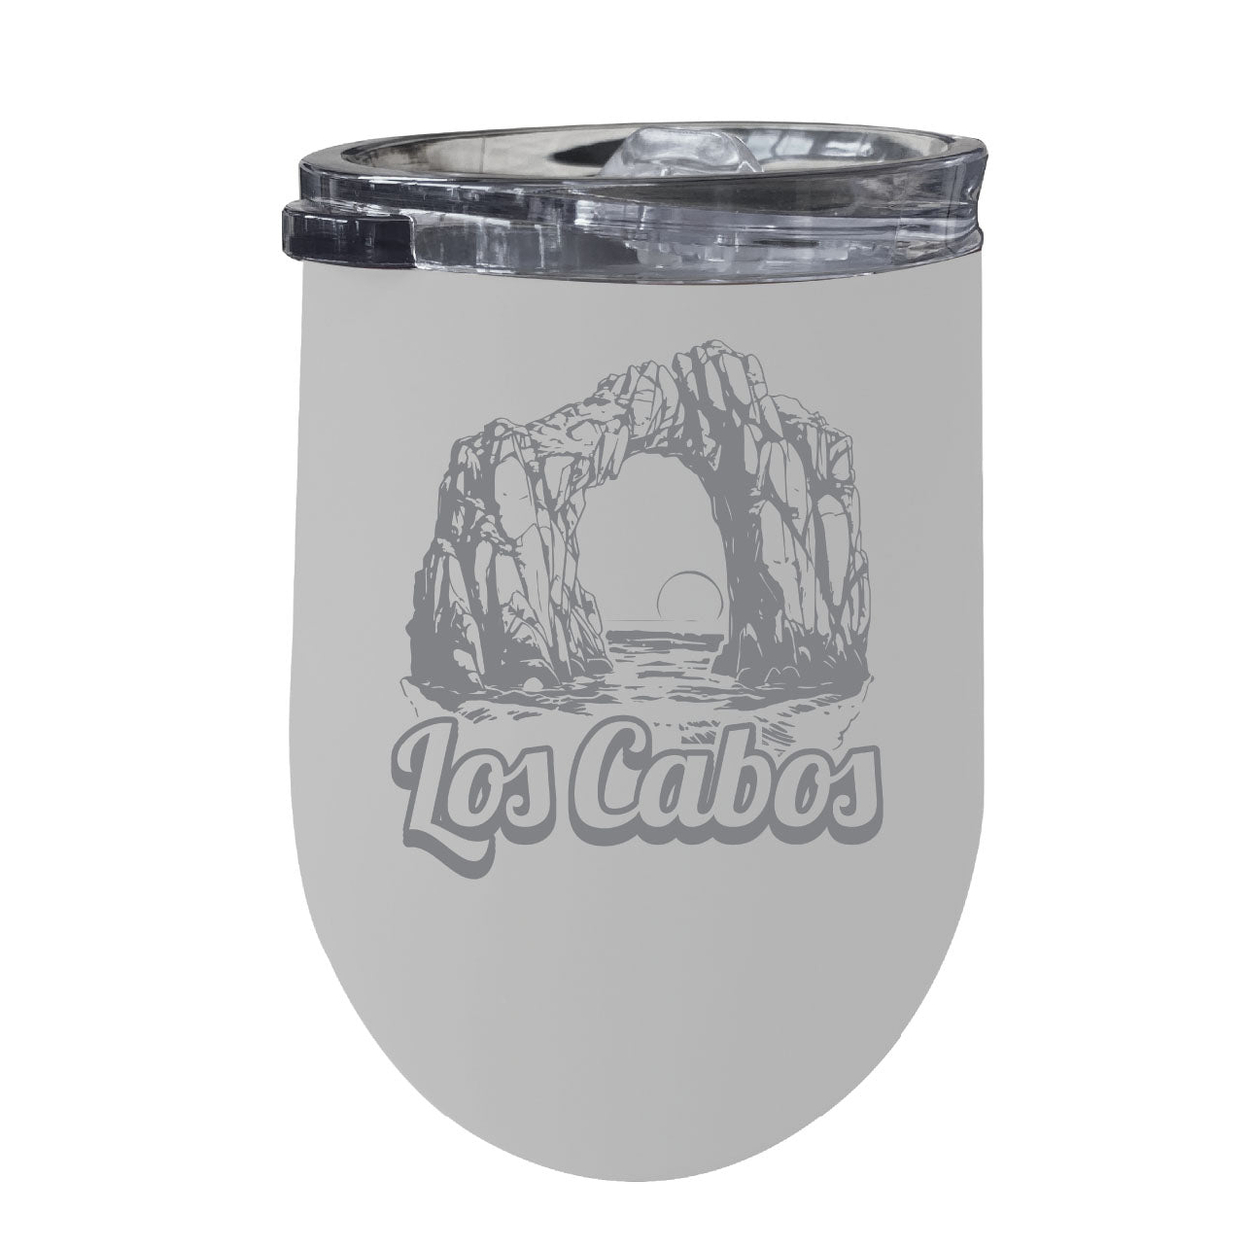 Los Cabos Mexico Souvenir 12 Oz Engraved Insulated Wine Stainless Steel Tumbler - White,,4-Pack